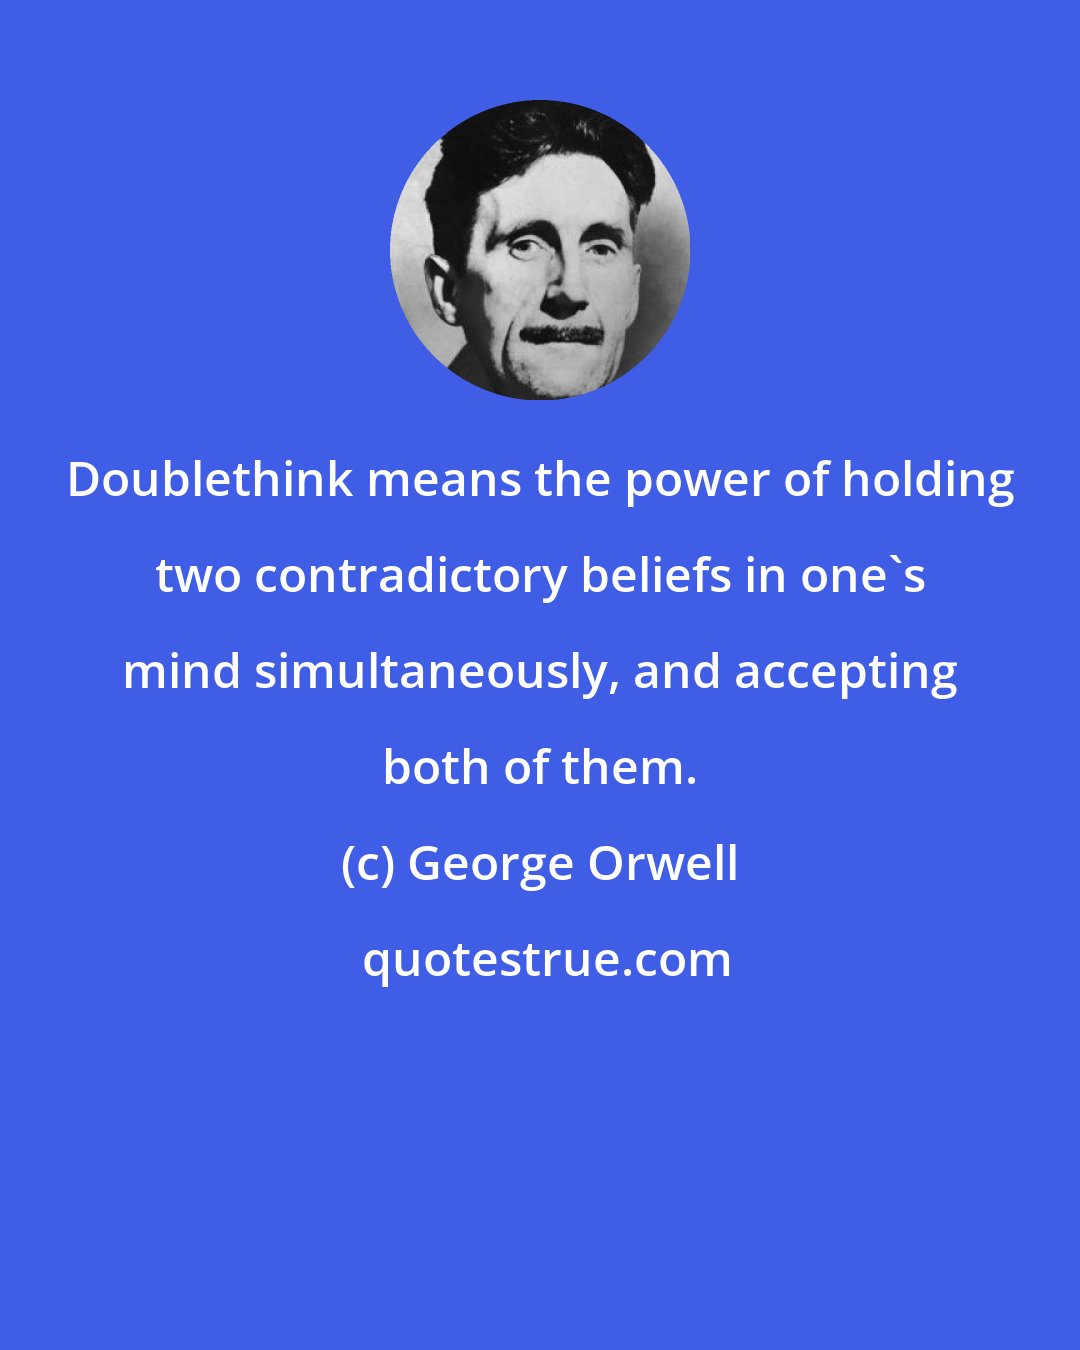 George Orwell: Doublethink means the power of holding two contradictory beliefs in one's mind simultaneously, and accepting both of them.